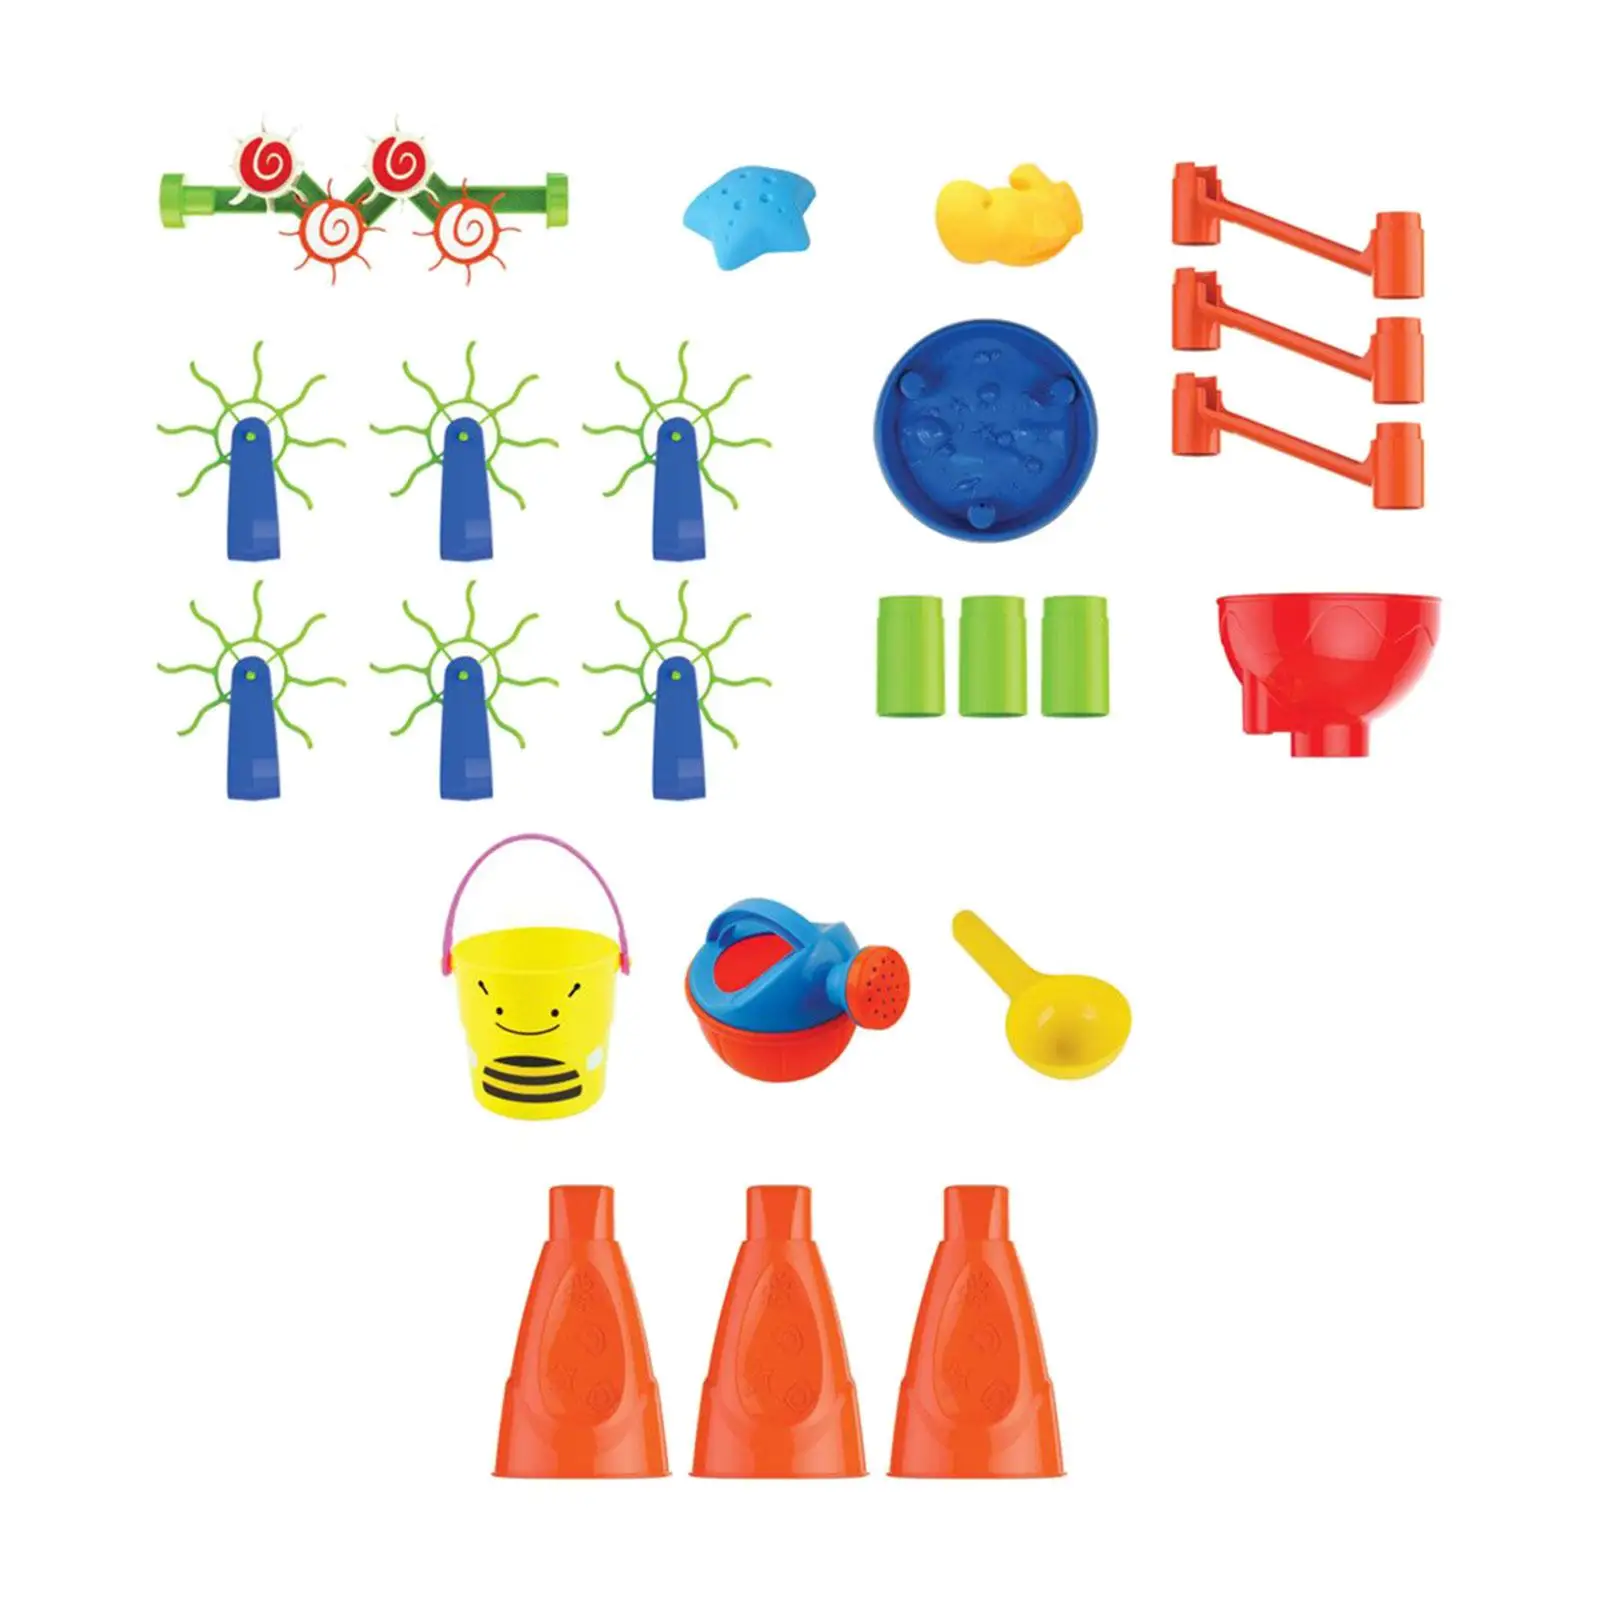 32x Sensory Play Table with Bucket and Shovel Tools Water Table Showers Pond